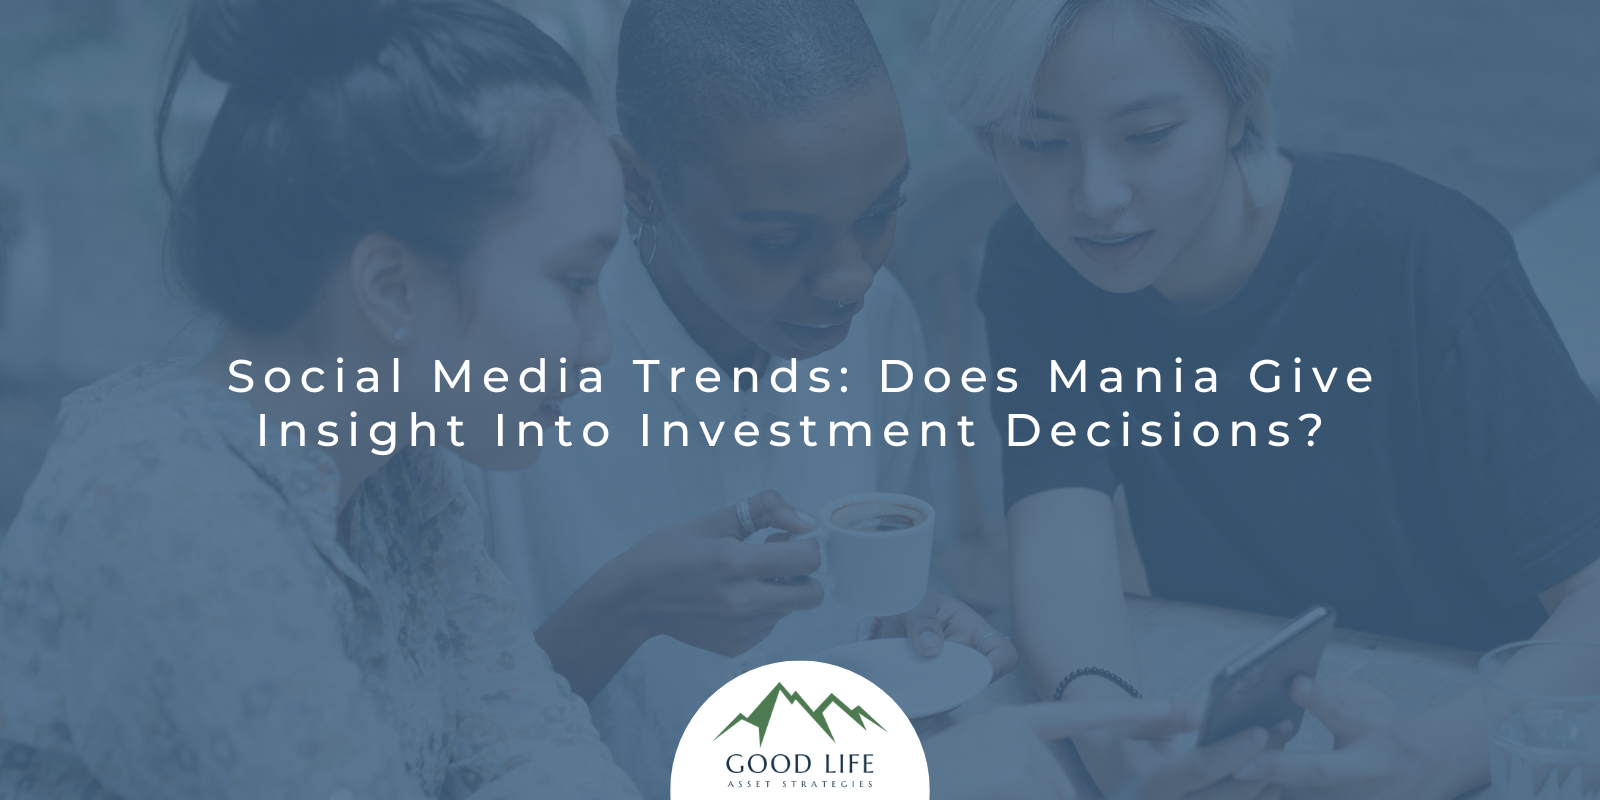 Social Media Trends: Does Mania Give Insight Into Investment Decisions?